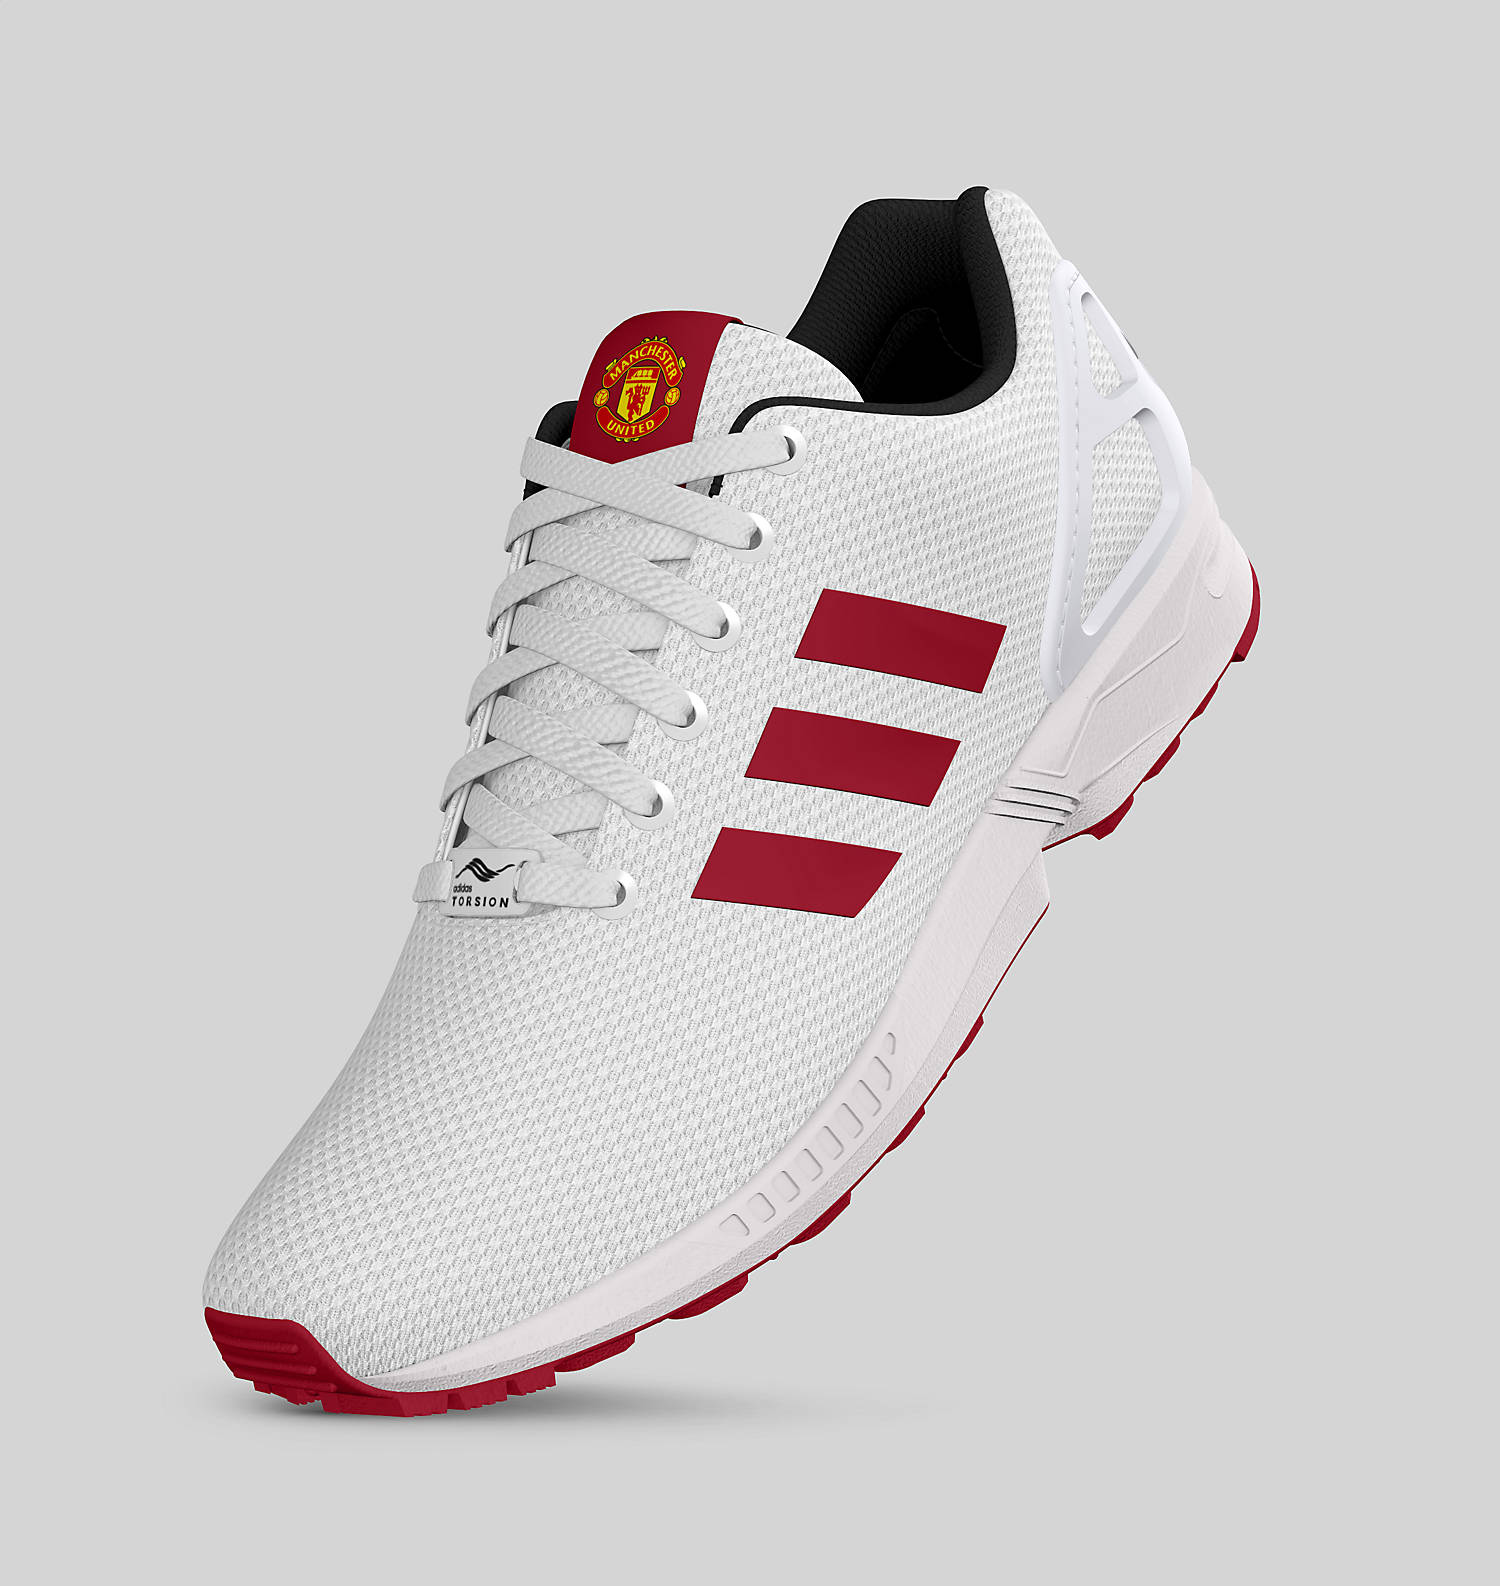 Adidas-Manchester-United-ZX-Flux (3)